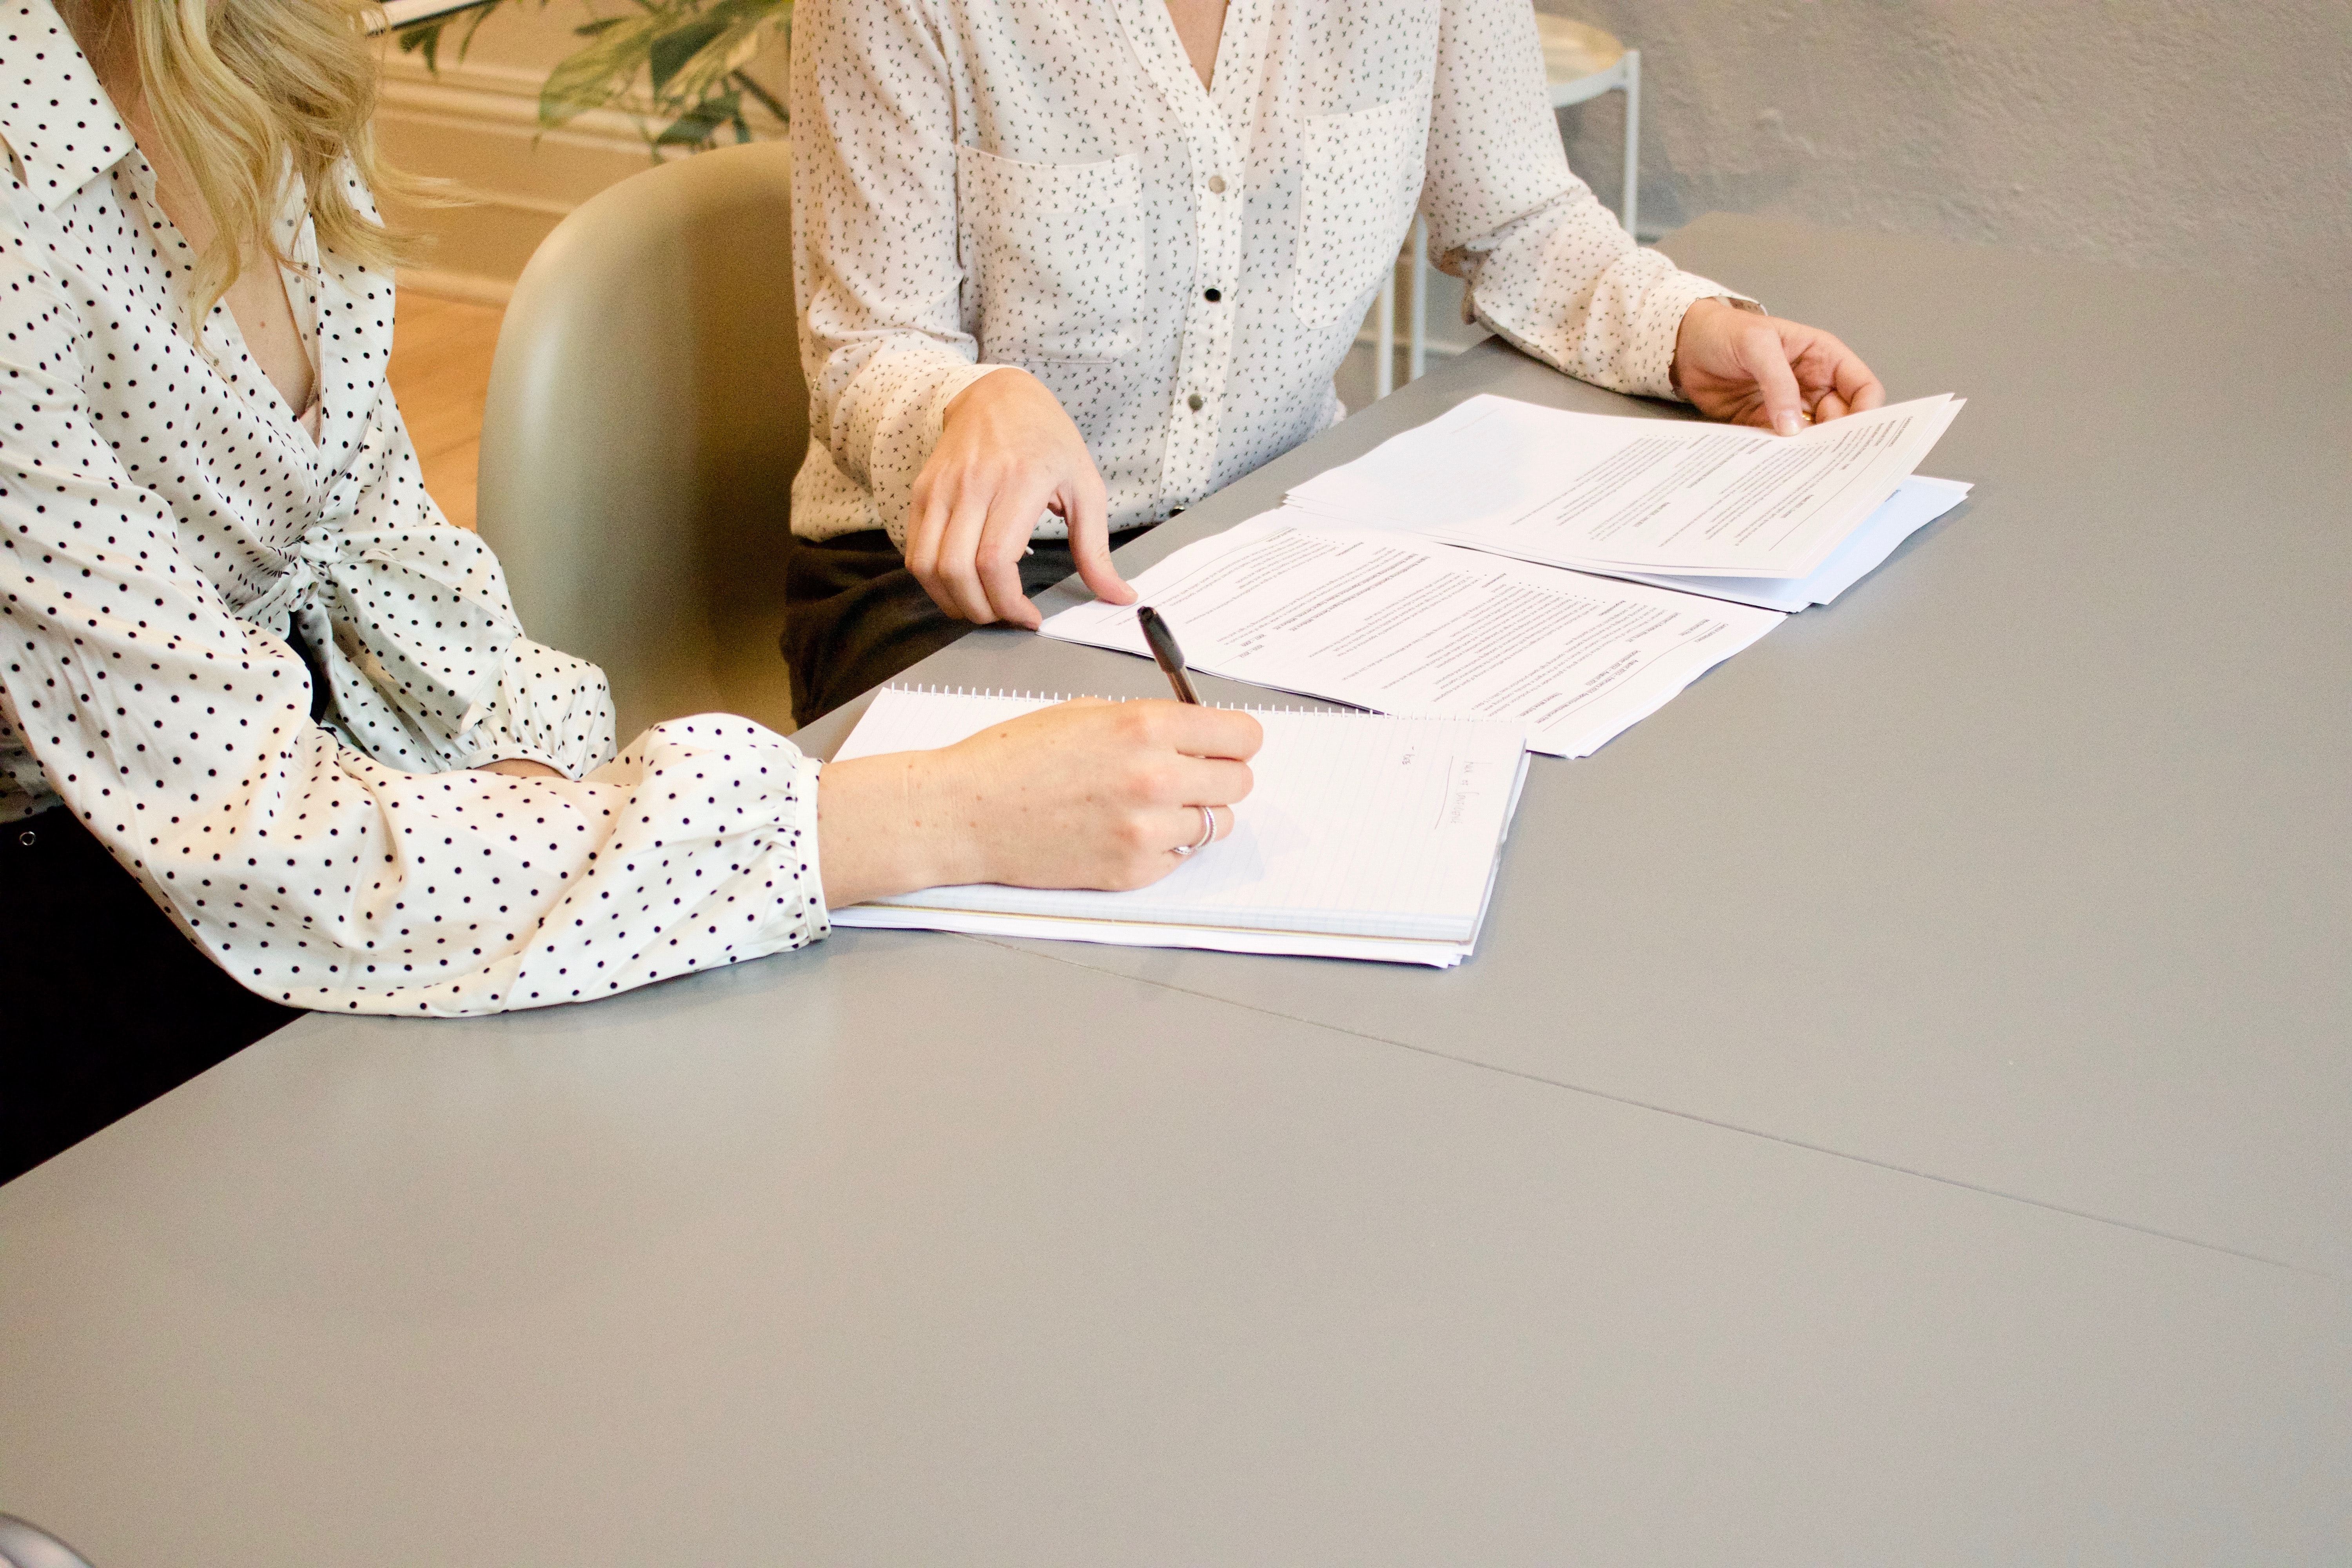 Two women having a meeting at a table with documents on it.